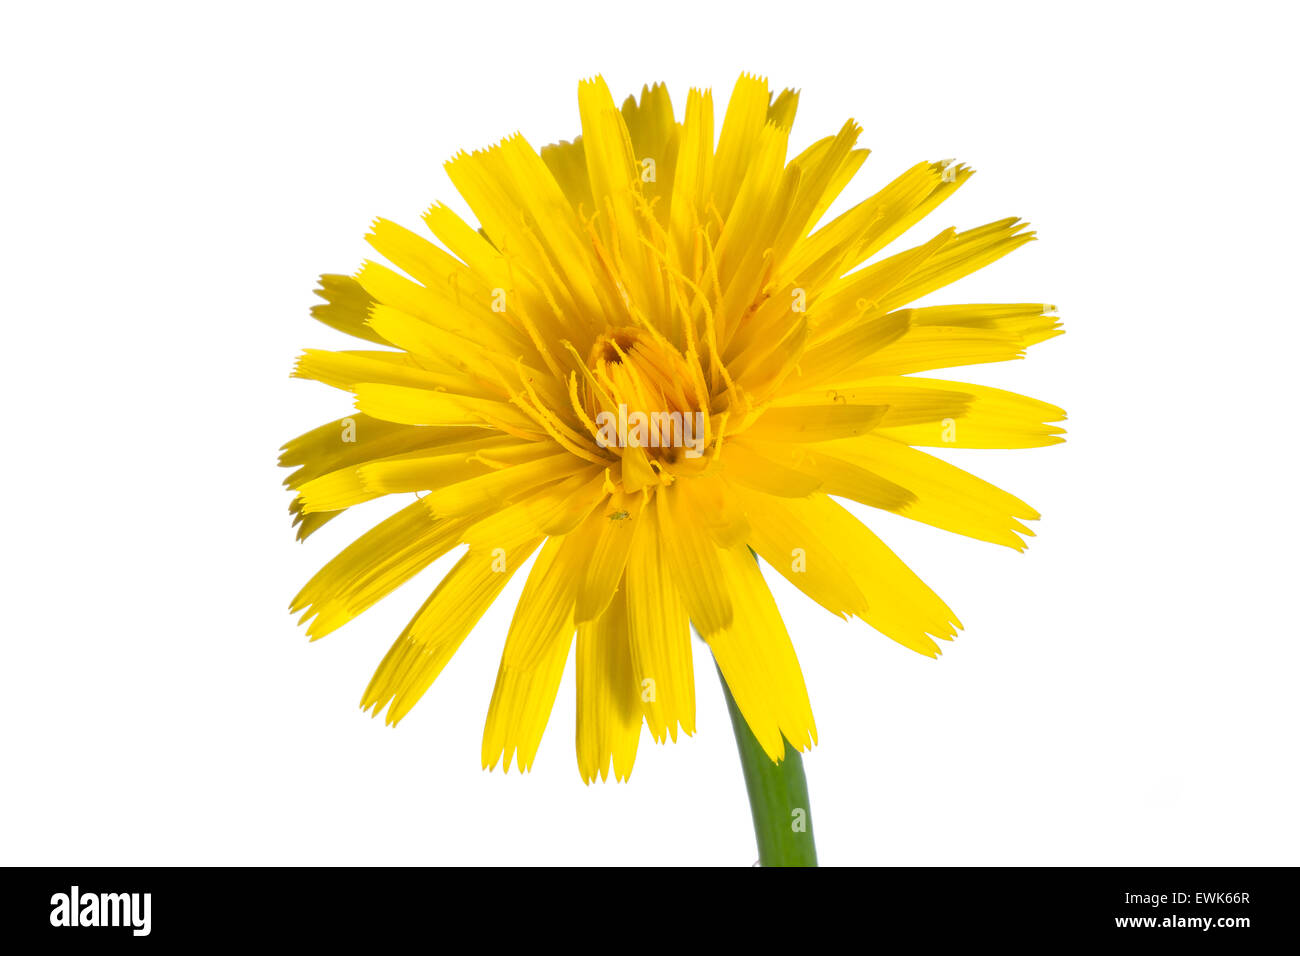 Cats ear flower against bright white background using outdoor studio Stock Photo